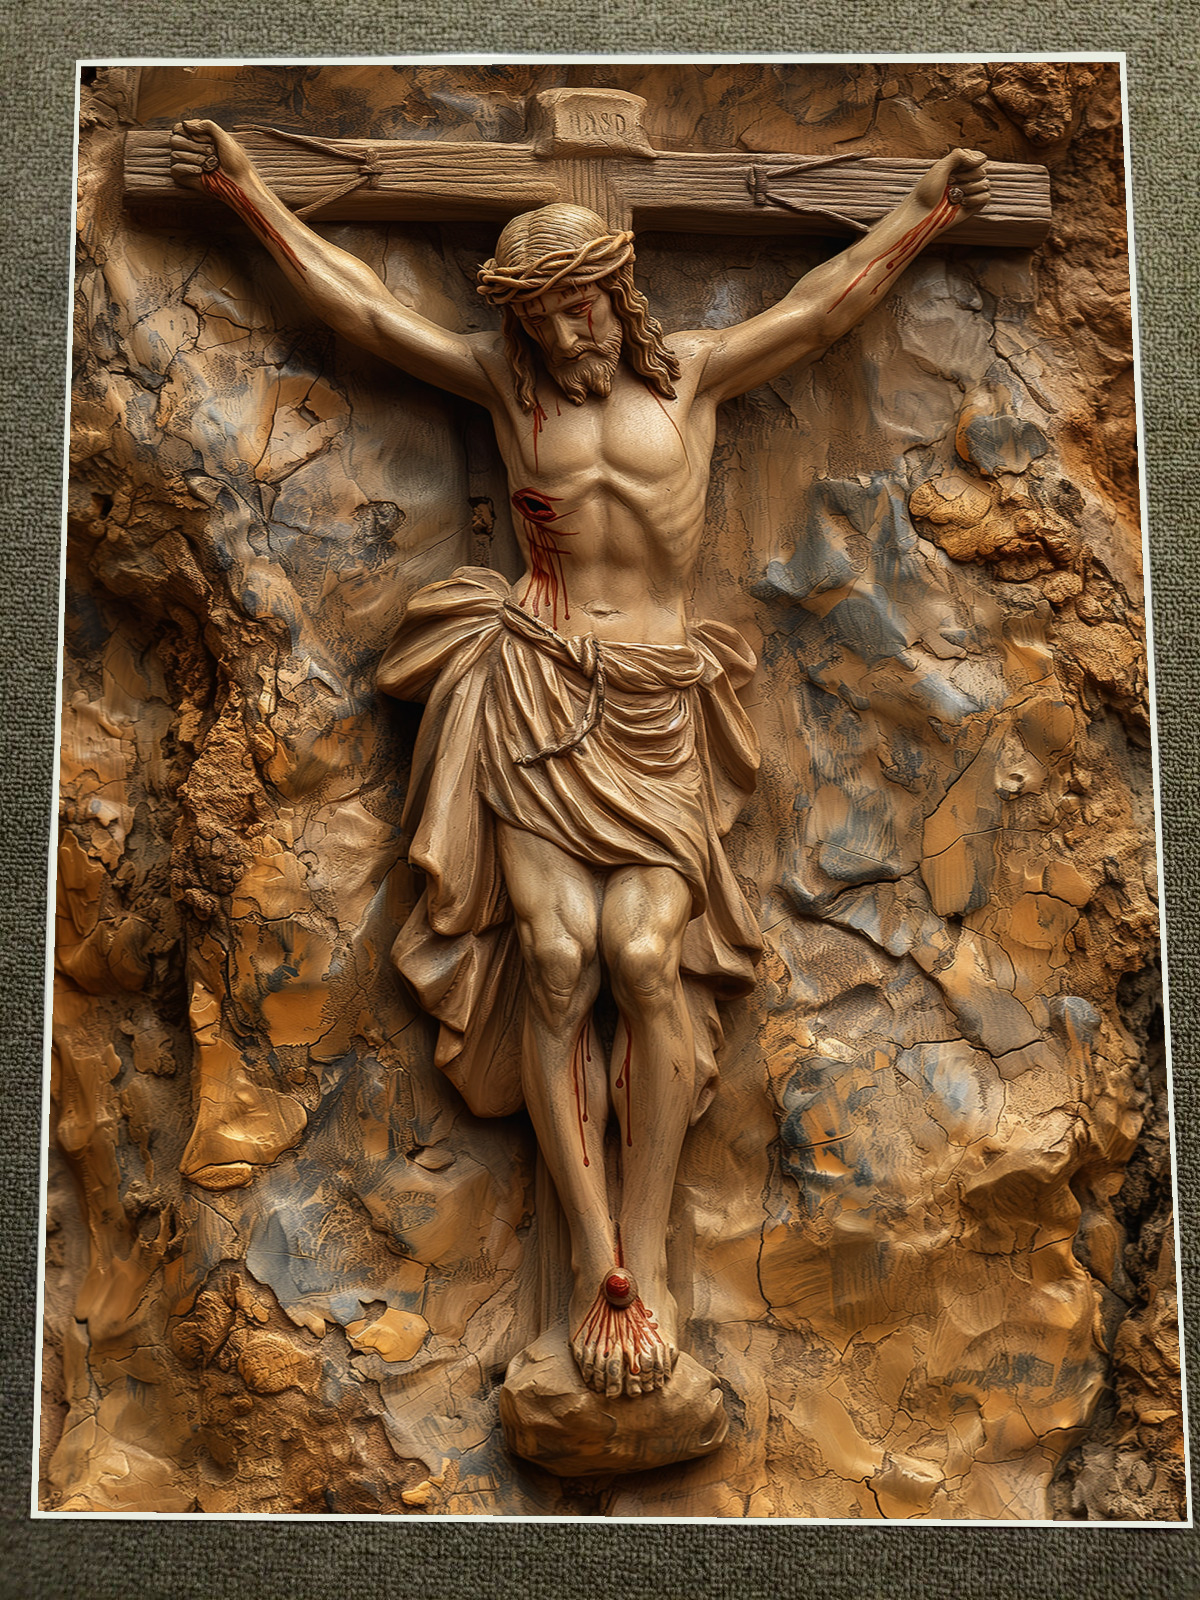 Antique Wood Jesus Crucifix on Natural Stone Wall Sculpture Poster 18x24in